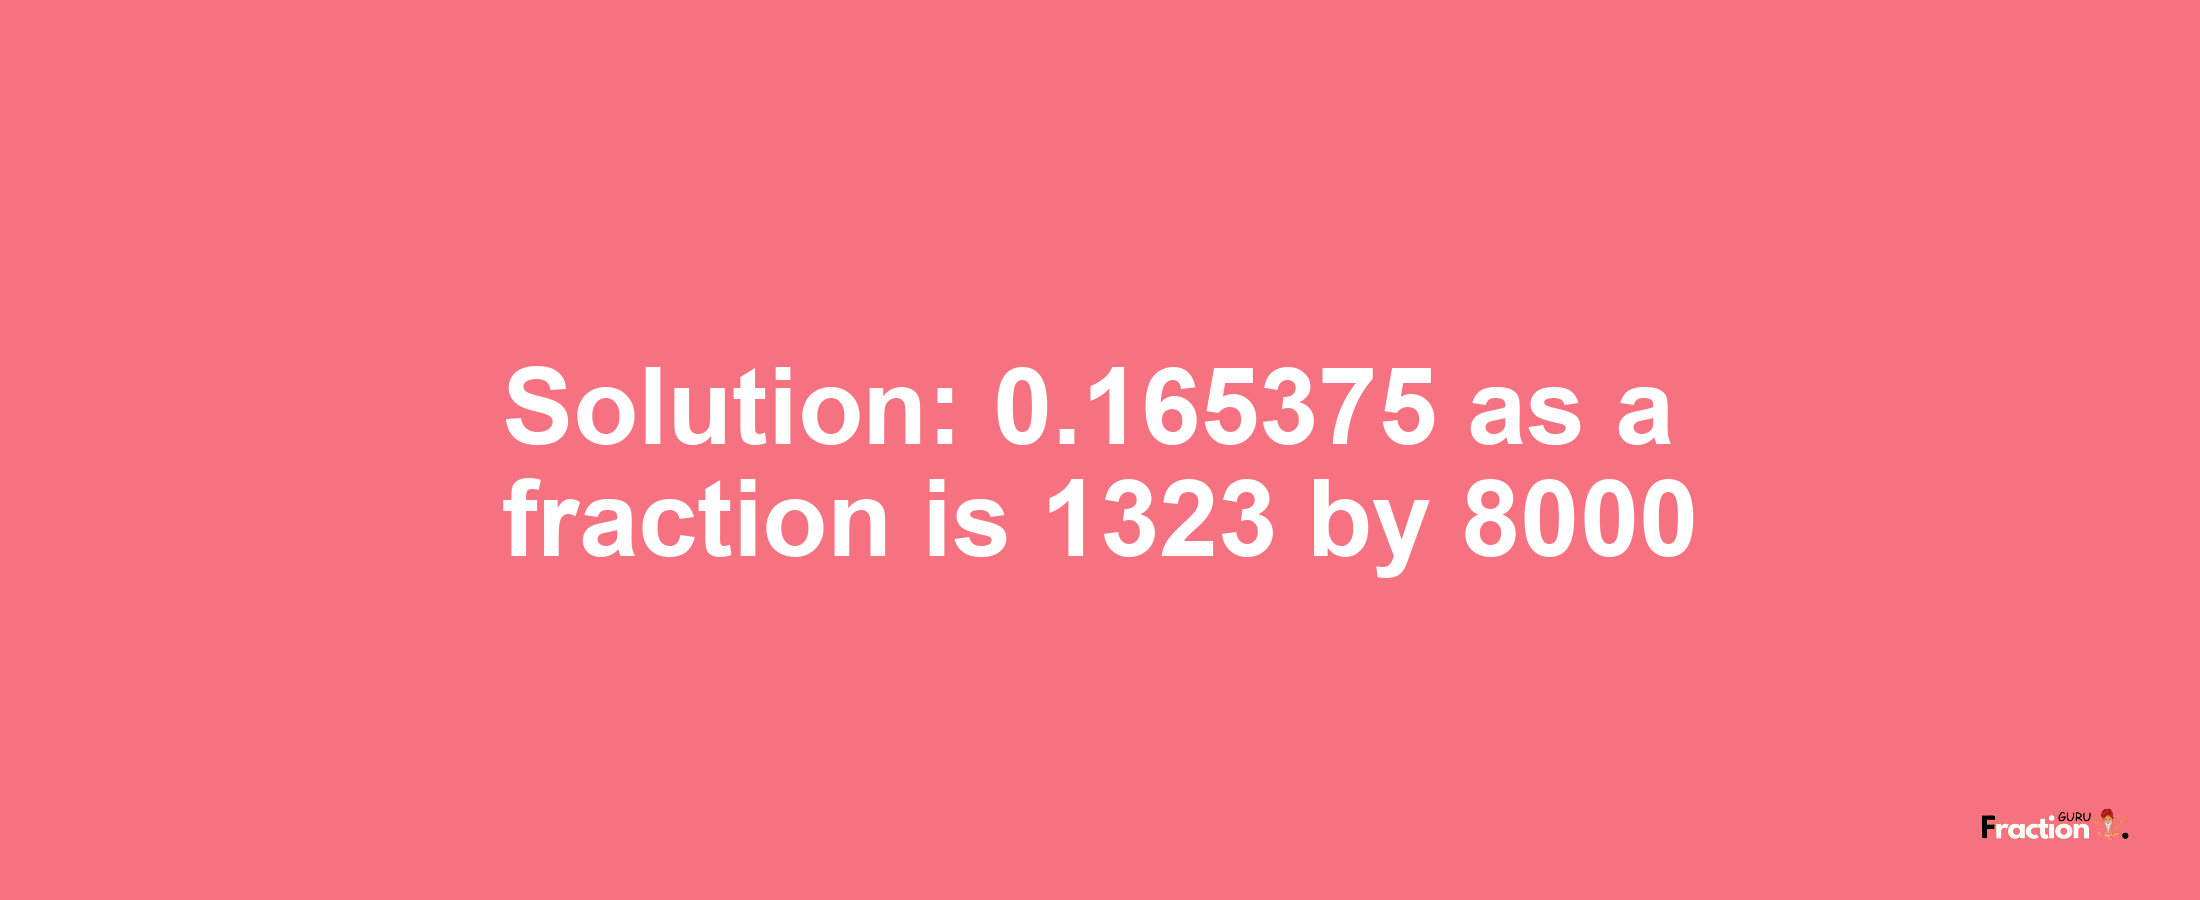 Solution:0.165375 as a fraction is 1323/8000